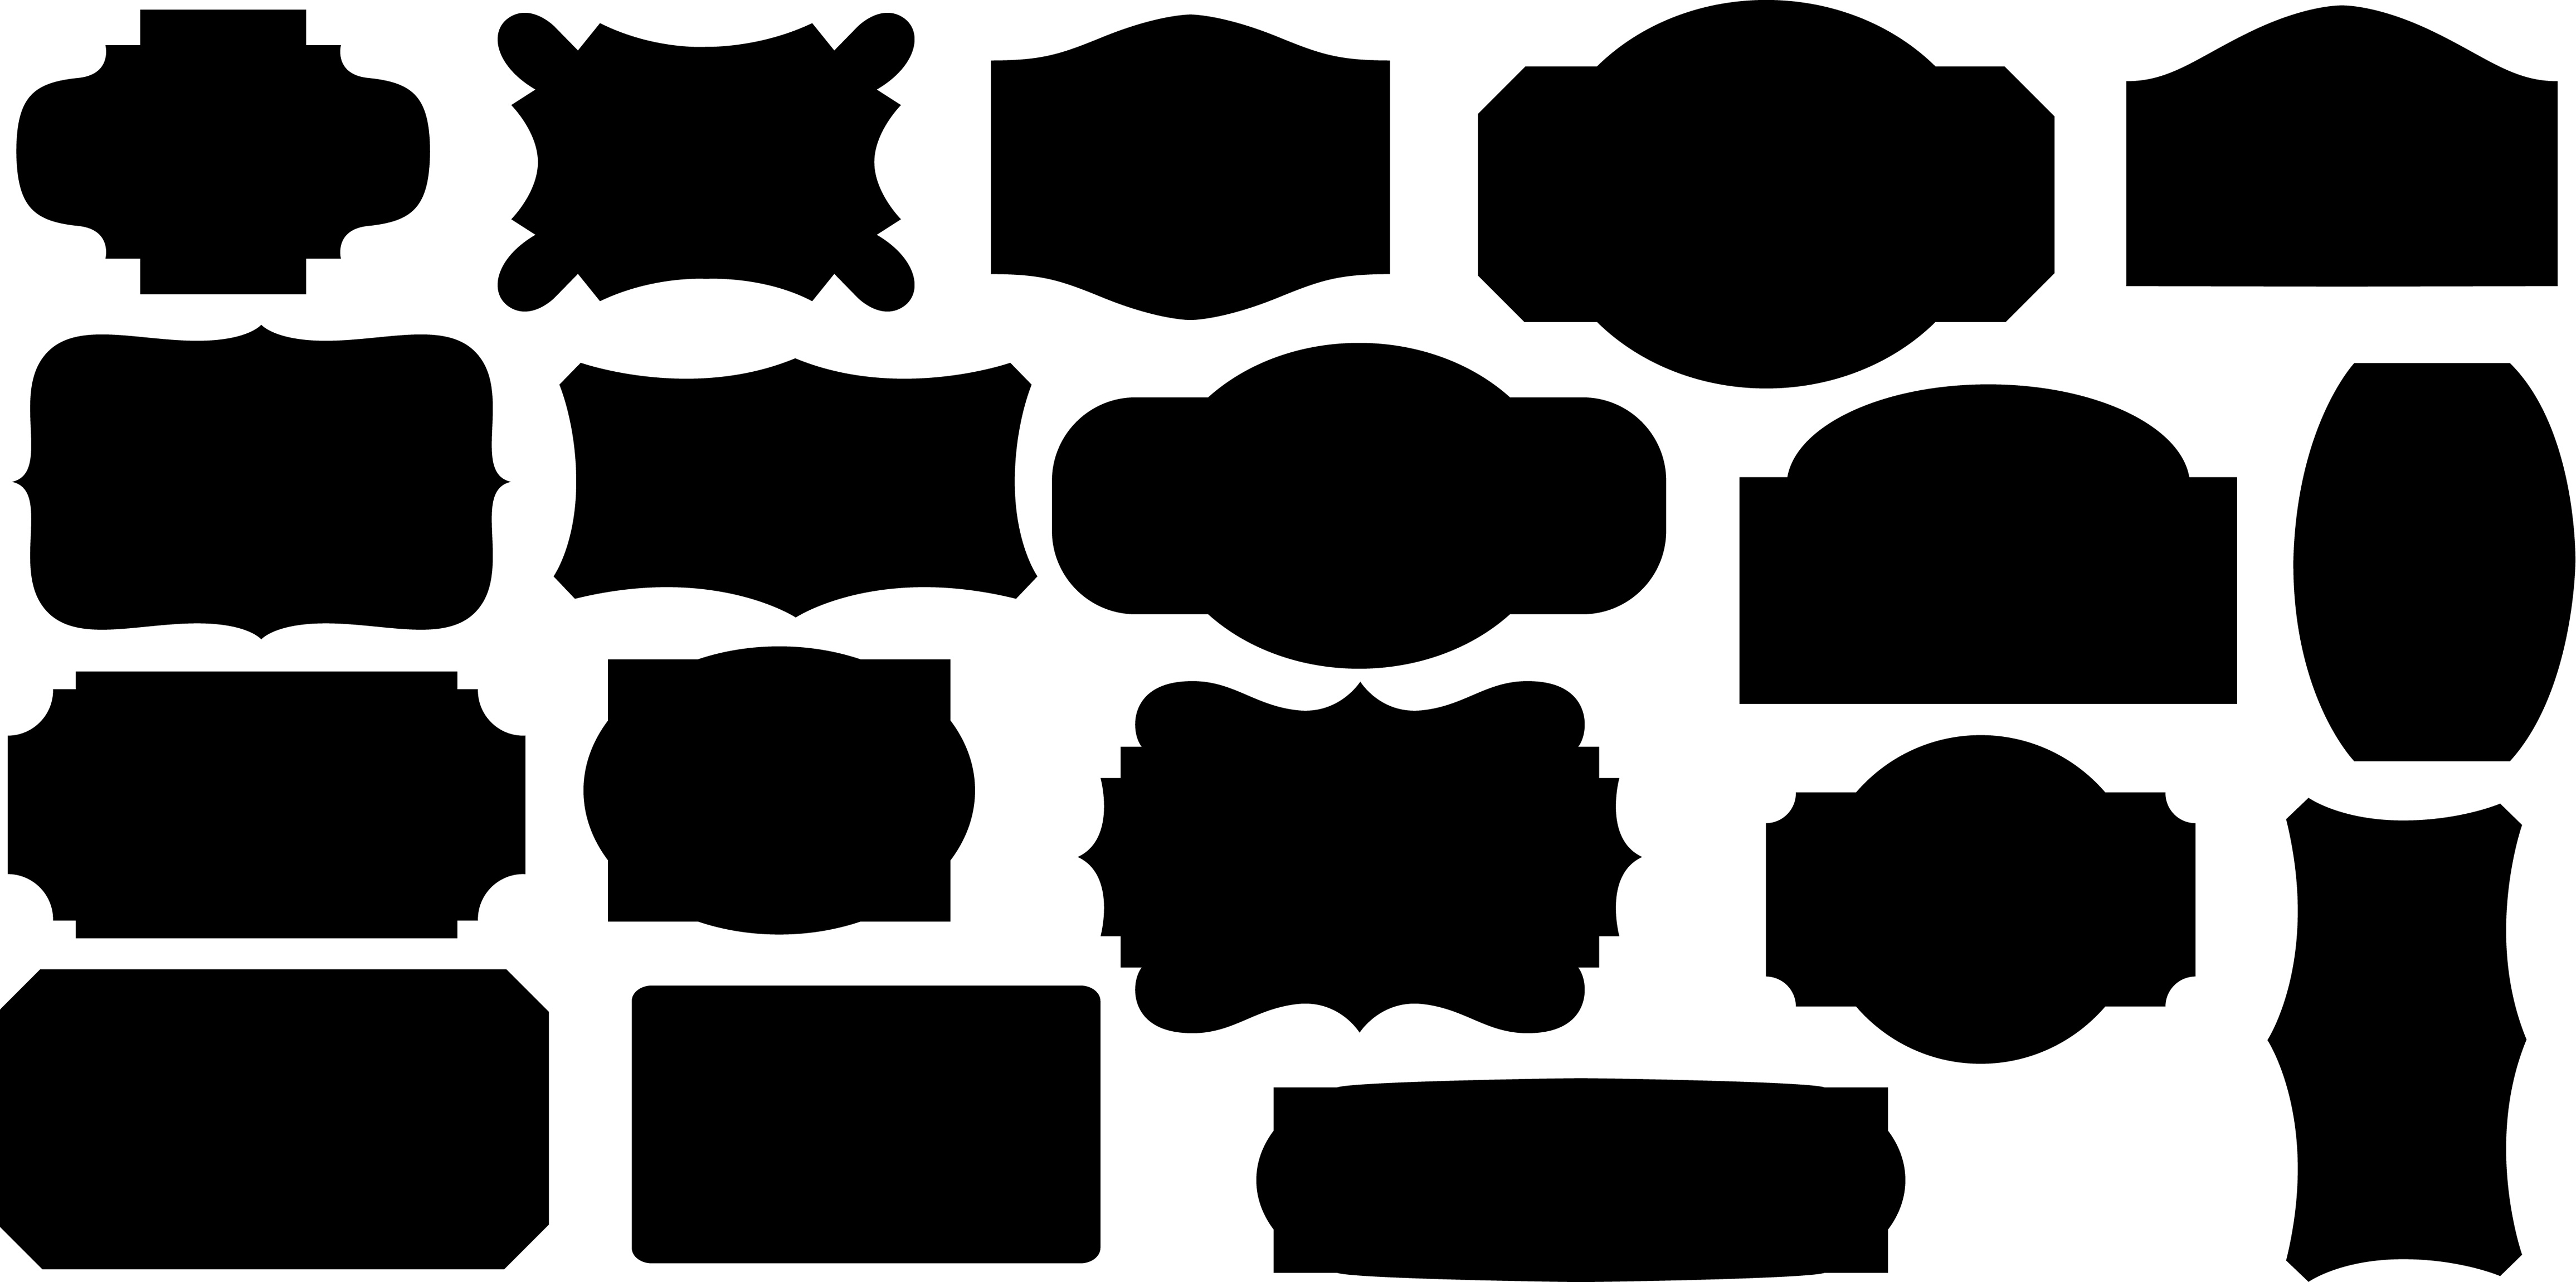 Free Vector Frame Shapes